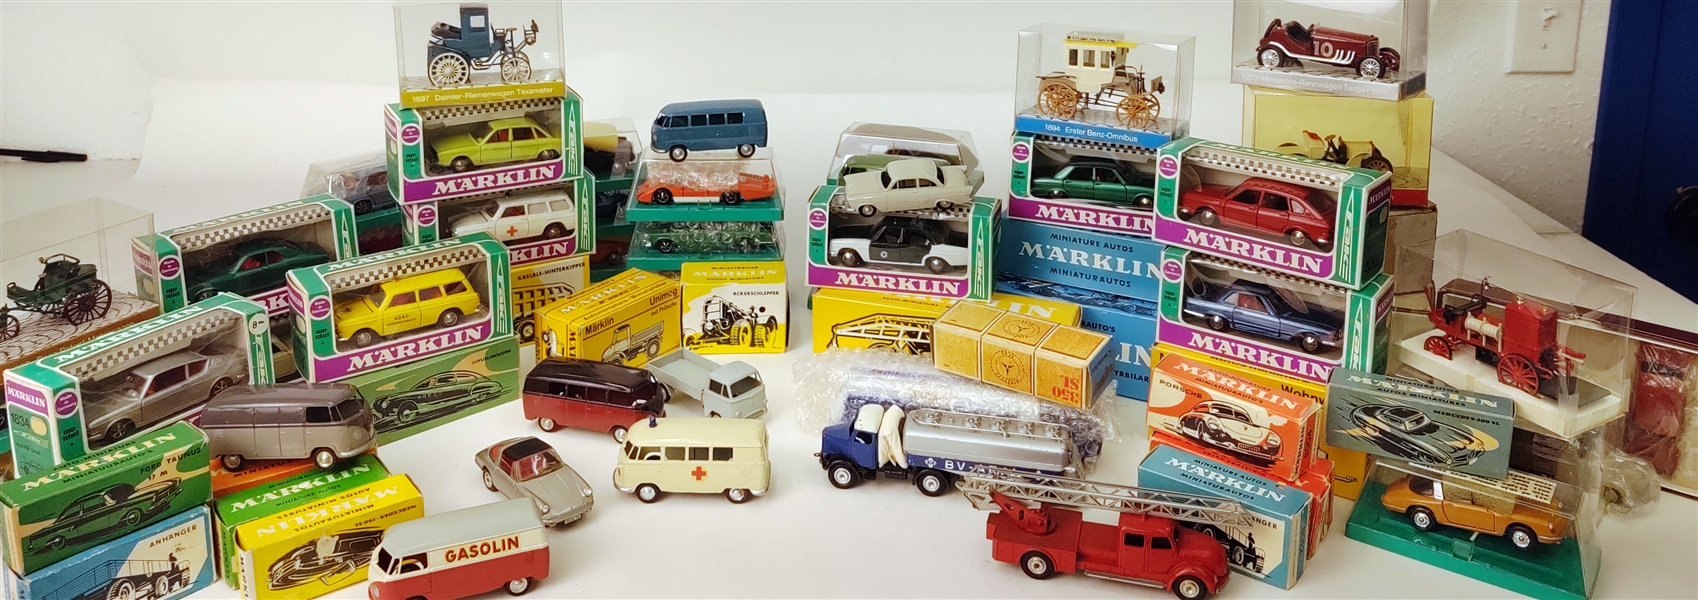 Marklin Toy Cars, Trucks, and more (Lot of 40+)